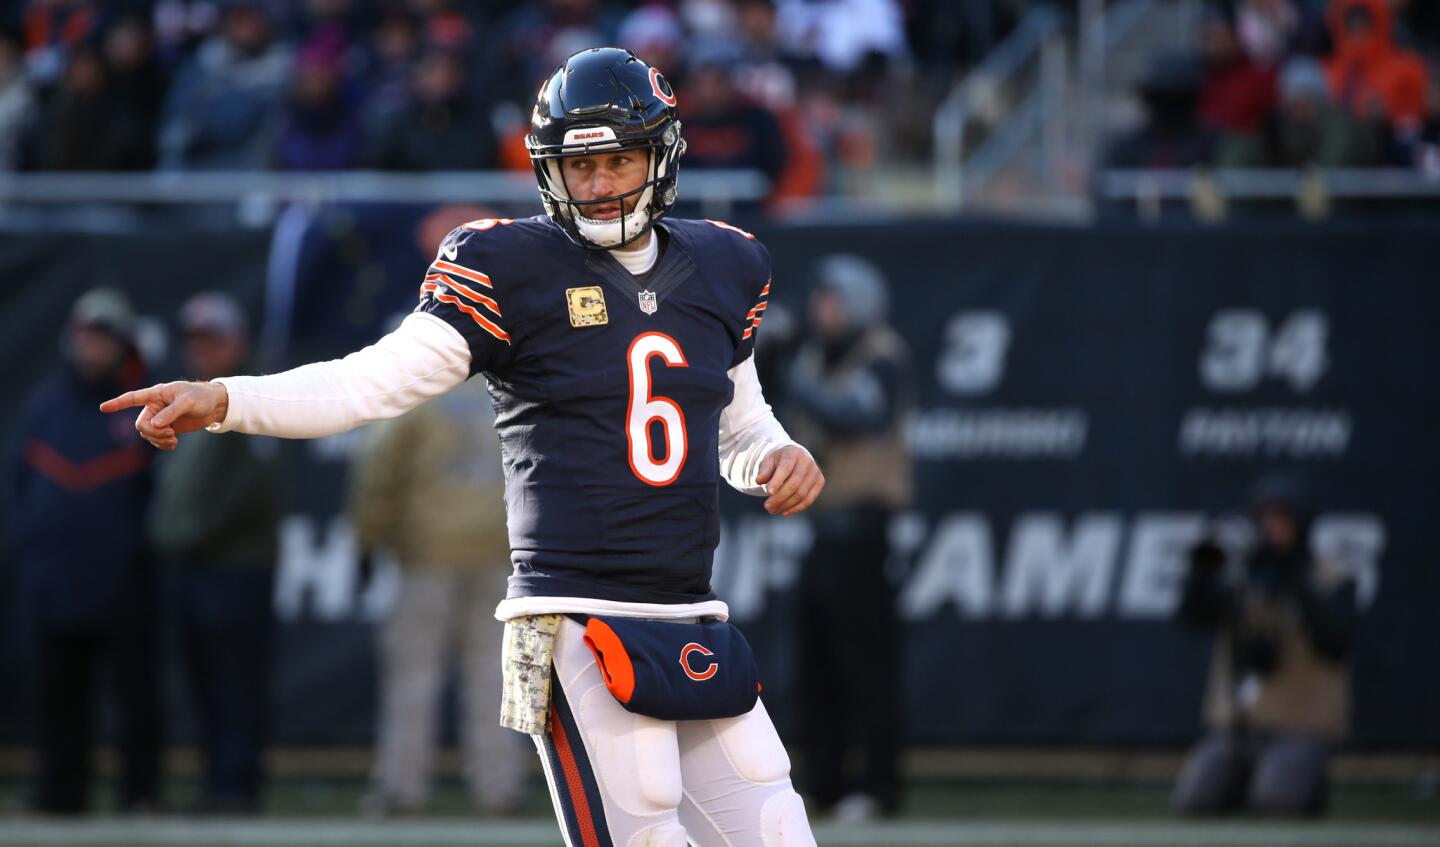 Jay Cutler against the Broncos at Soldier Field.